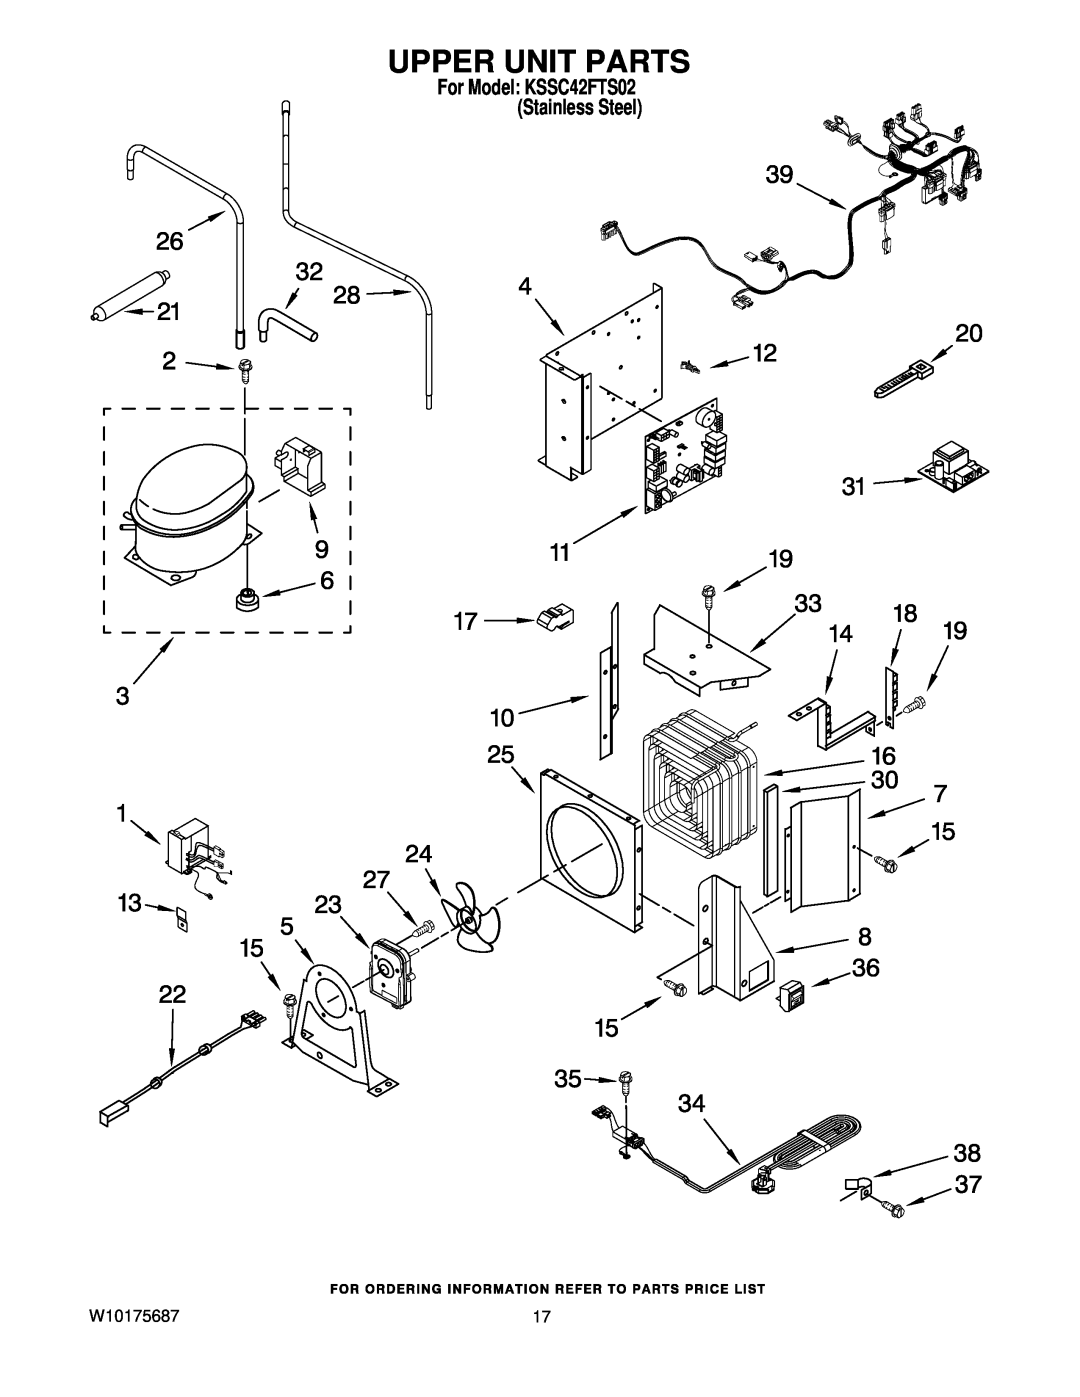 KitchenAid manual Upper Unit Parts, W10175687, For Model KSSC42FTS02 Stainless Steel 